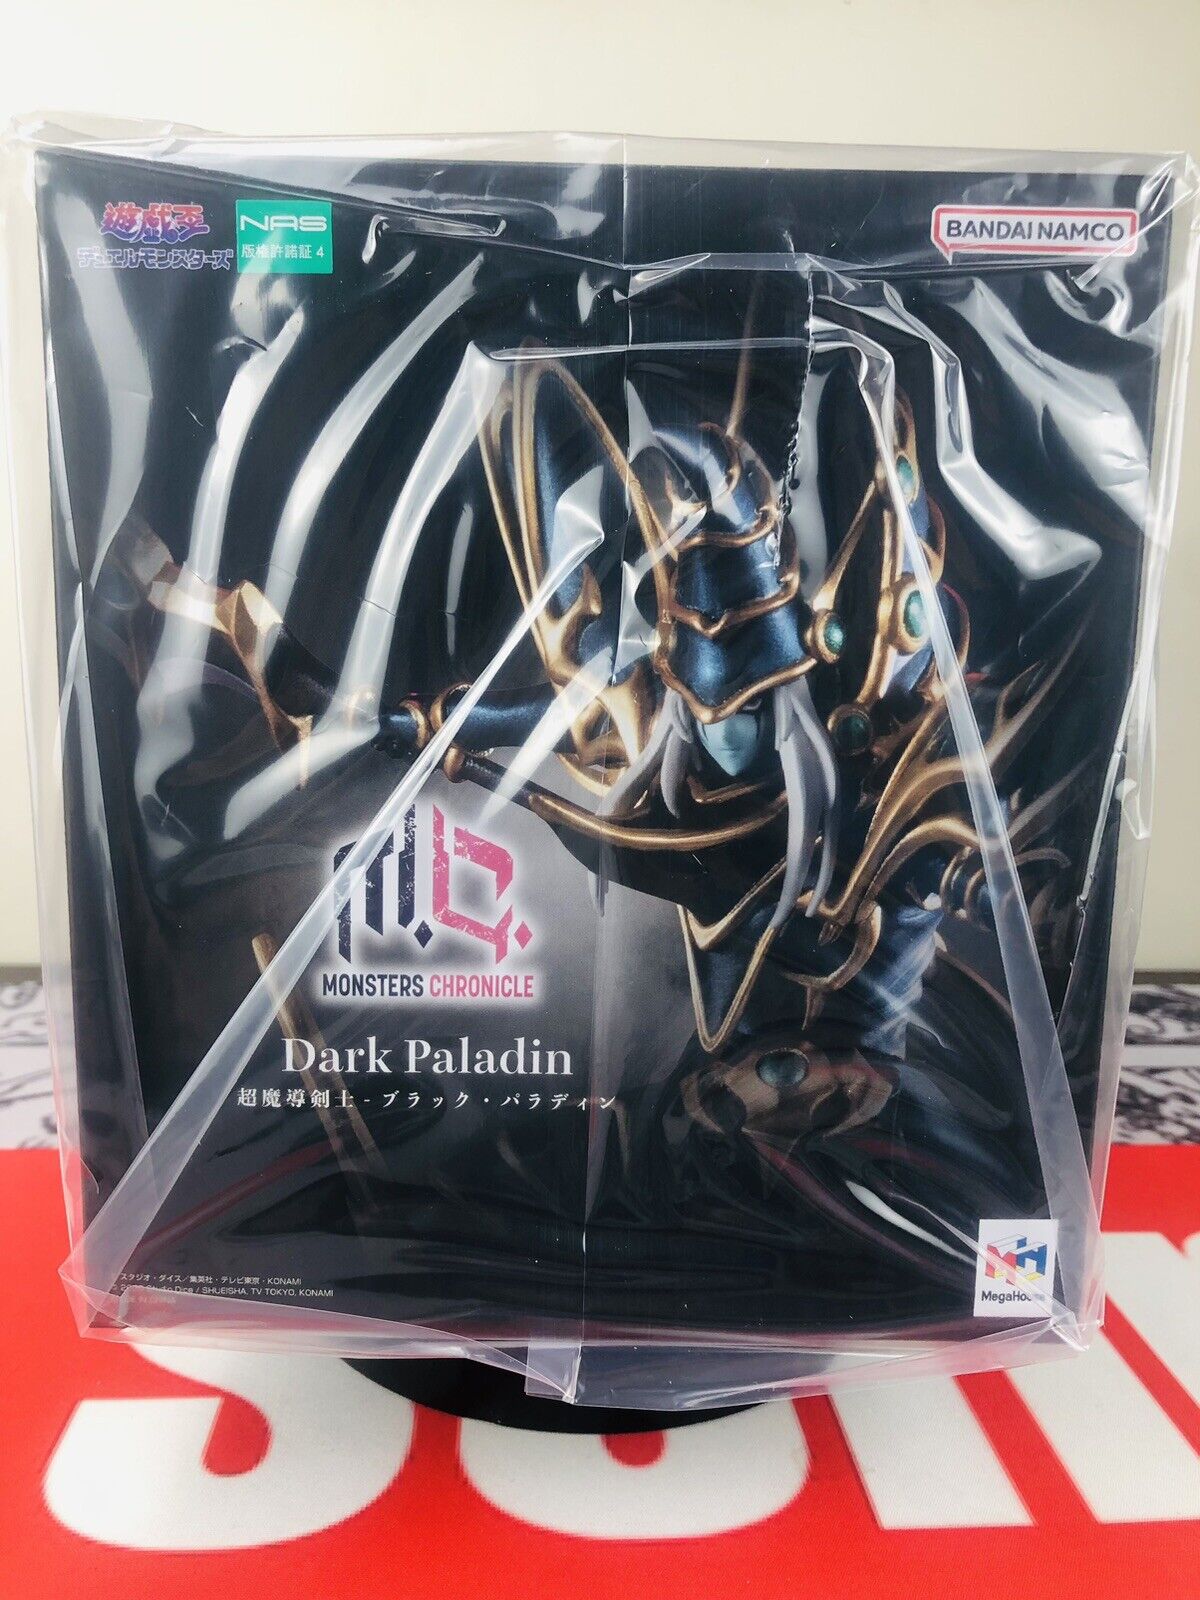  Yu-Gi-Oh Dark Paladin Duel Monster Figure By MegaHouse